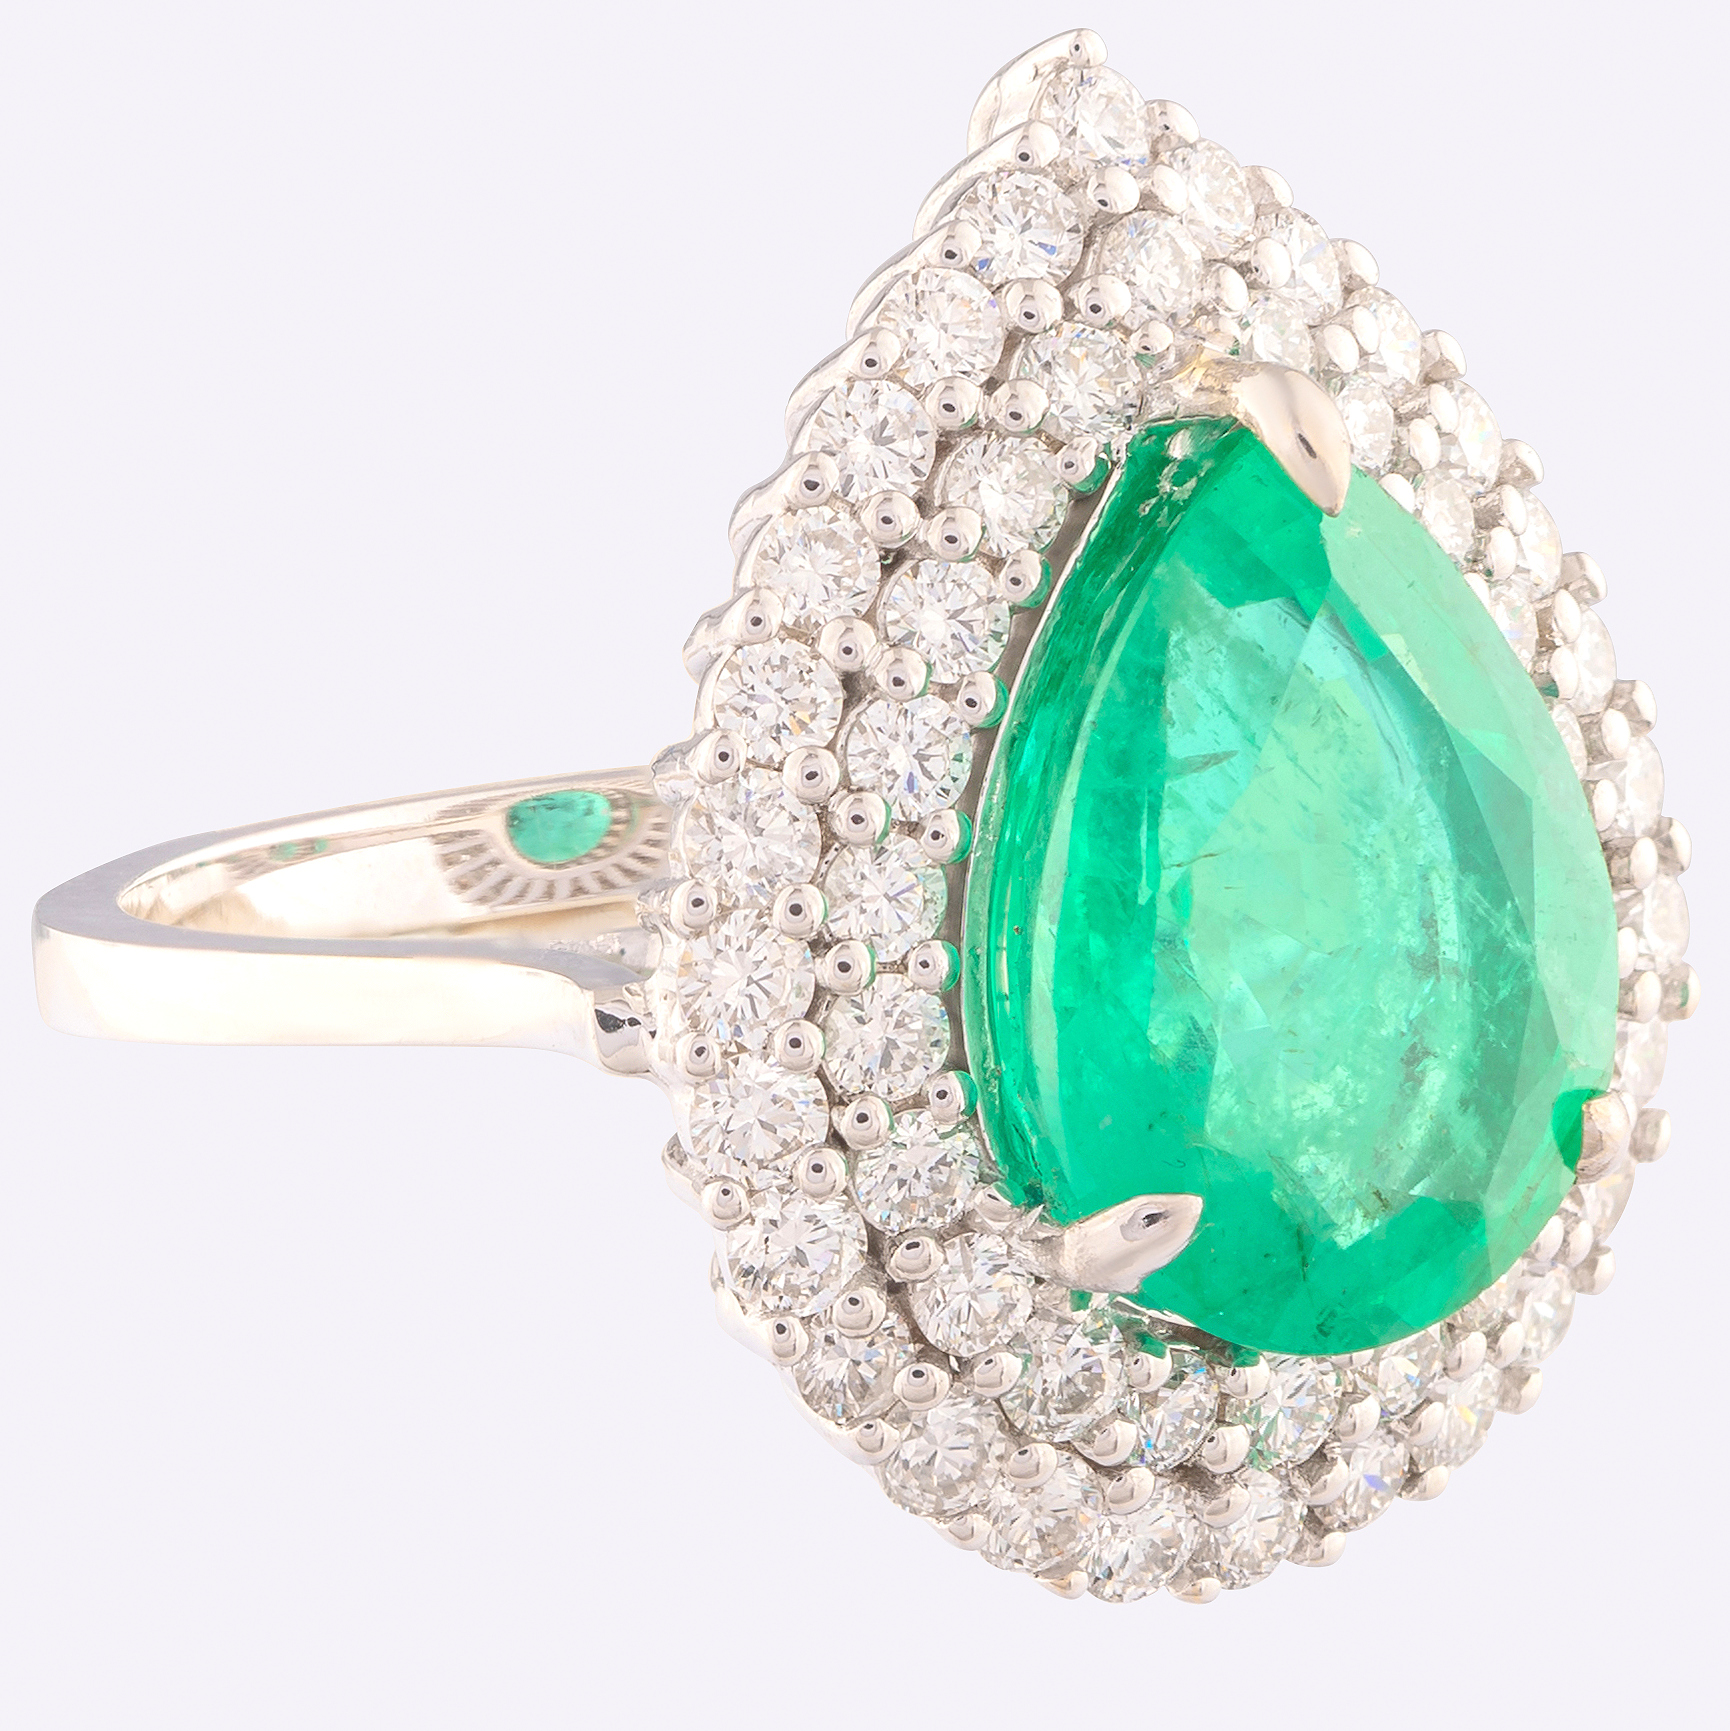 14K White Gold Cluster Ring 4,70 ct Natural Emerald - 1,40 ct Diamond - Image 3 of 4